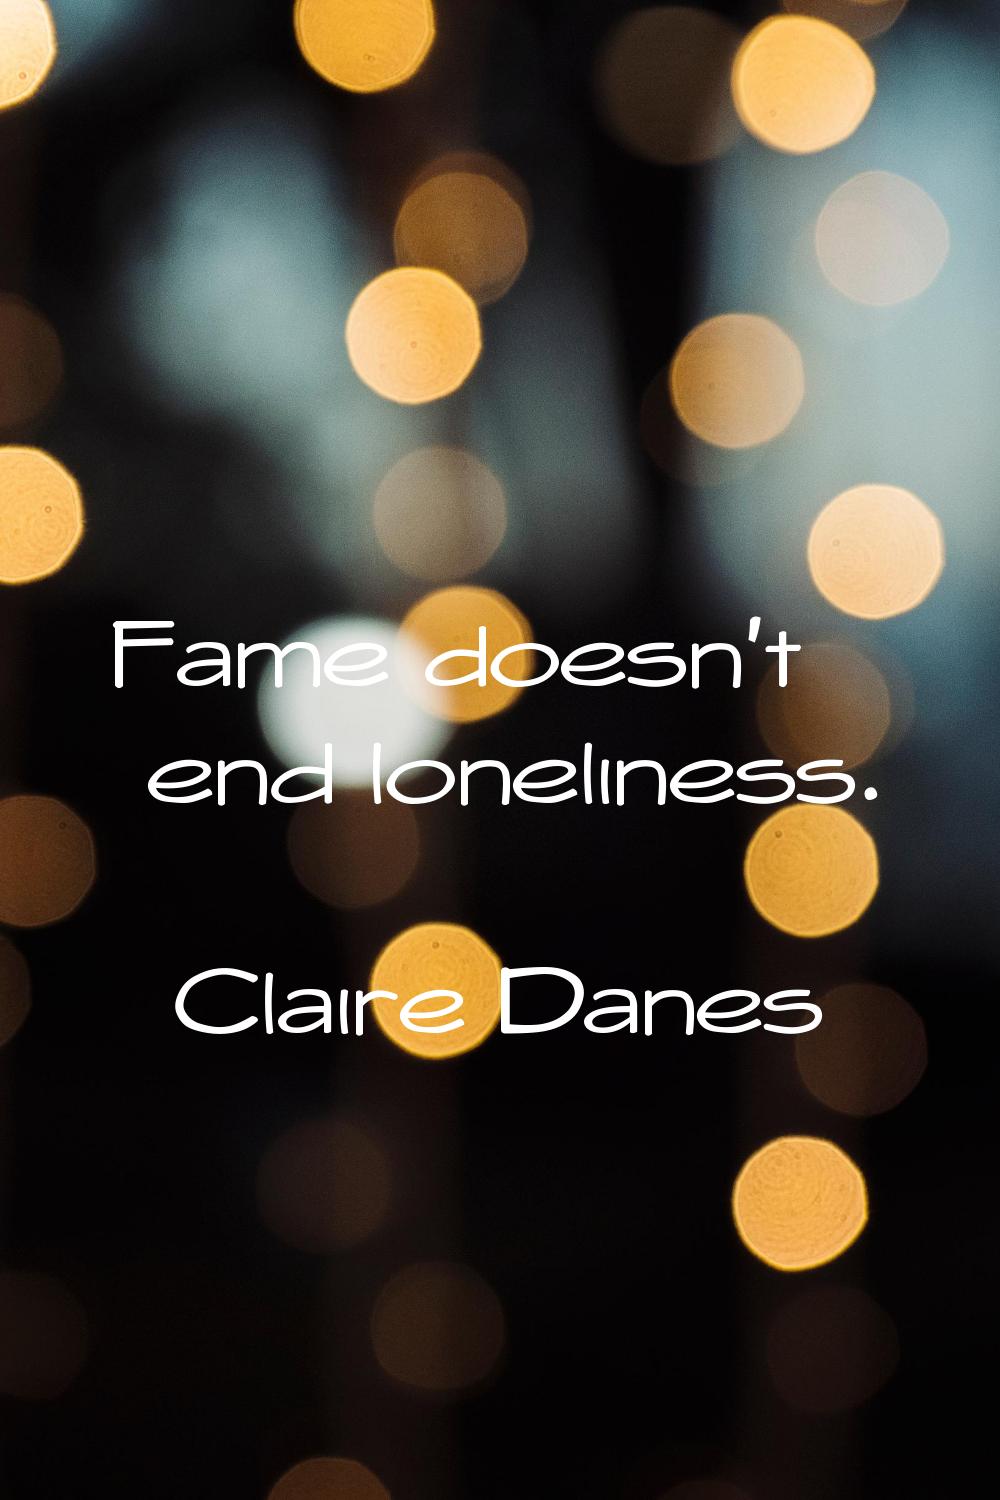 Fame doesn't end loneliness.